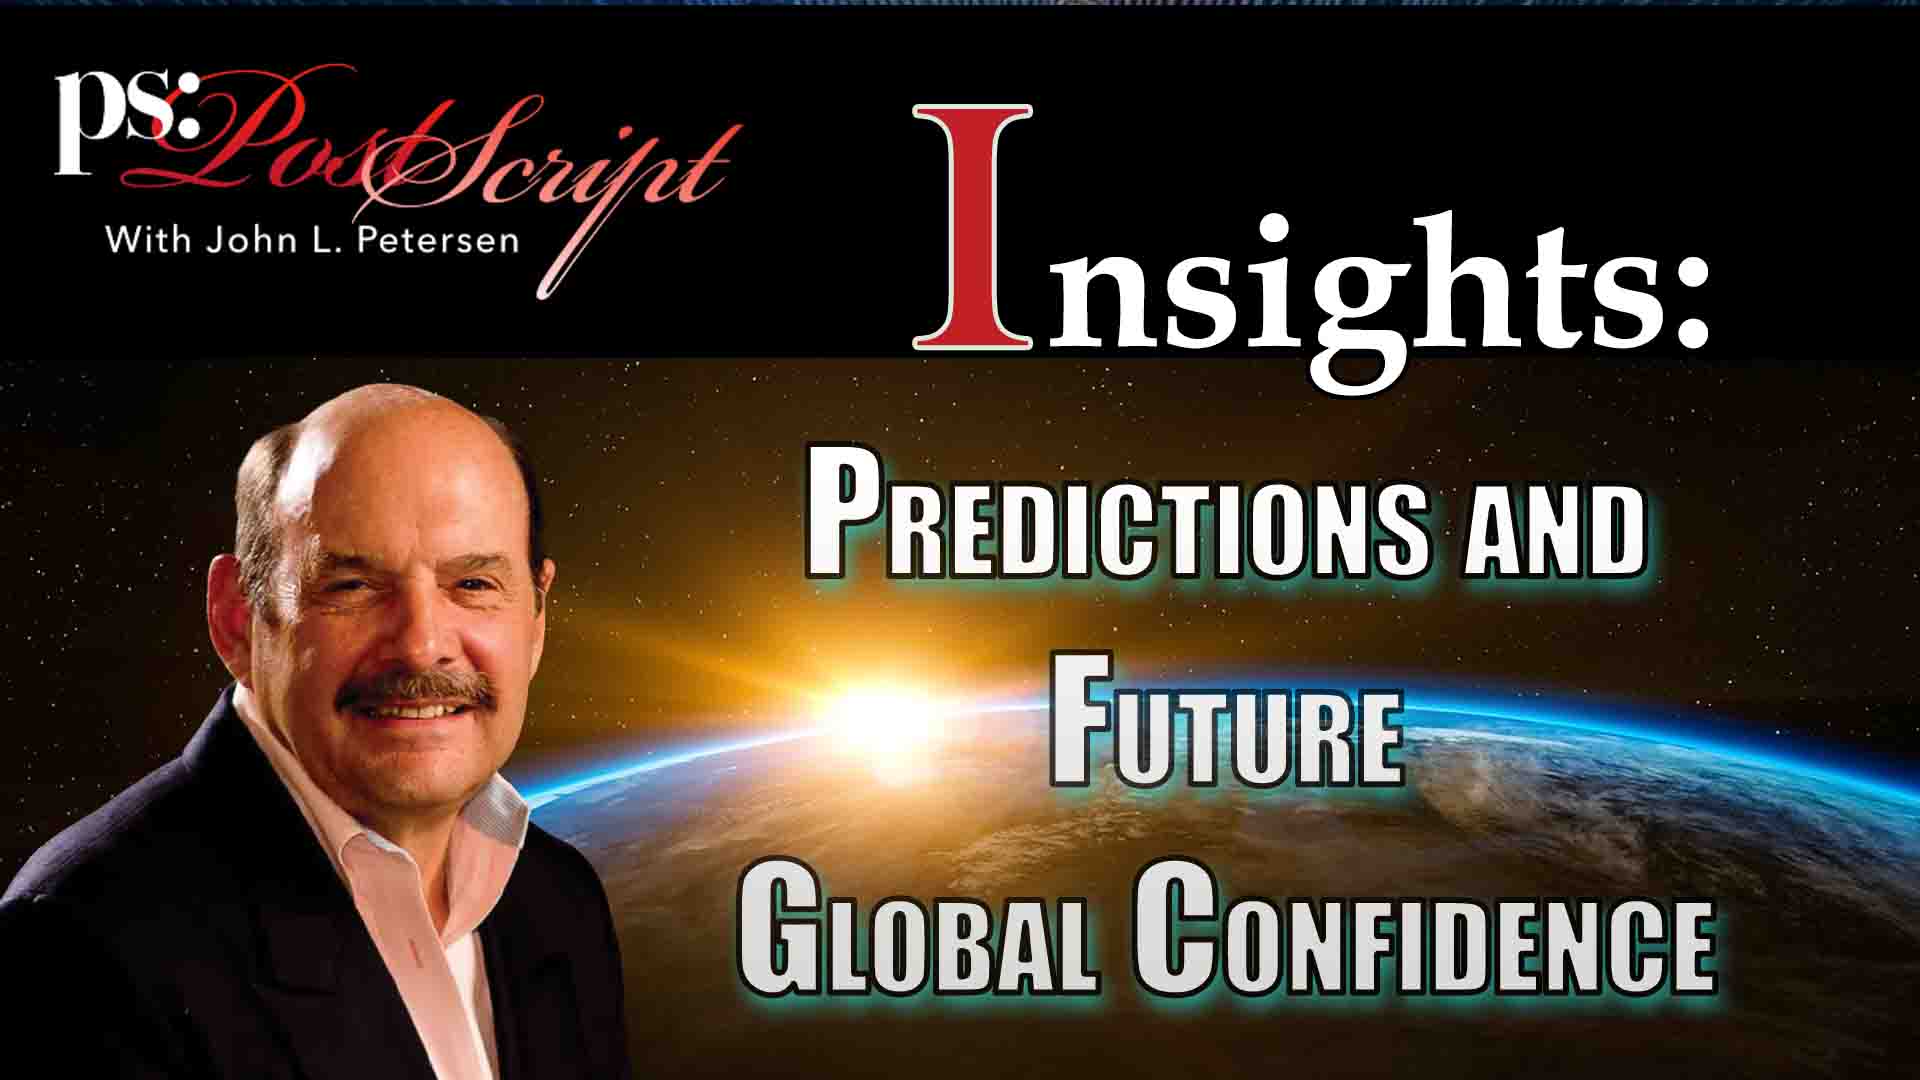 John addresses Martin Armstrong's economic confidence model, highlighting its prediction of a directional change in May 2023. The model suggests shifting global confidence from governments to the private sector, indicating potential instability and a future downturn. John underscores the increasing loss of faith in governmental systems and the potential for significant global changes, including economic shifts, geopolitical tensions, and technological advancements impacting societal structures.